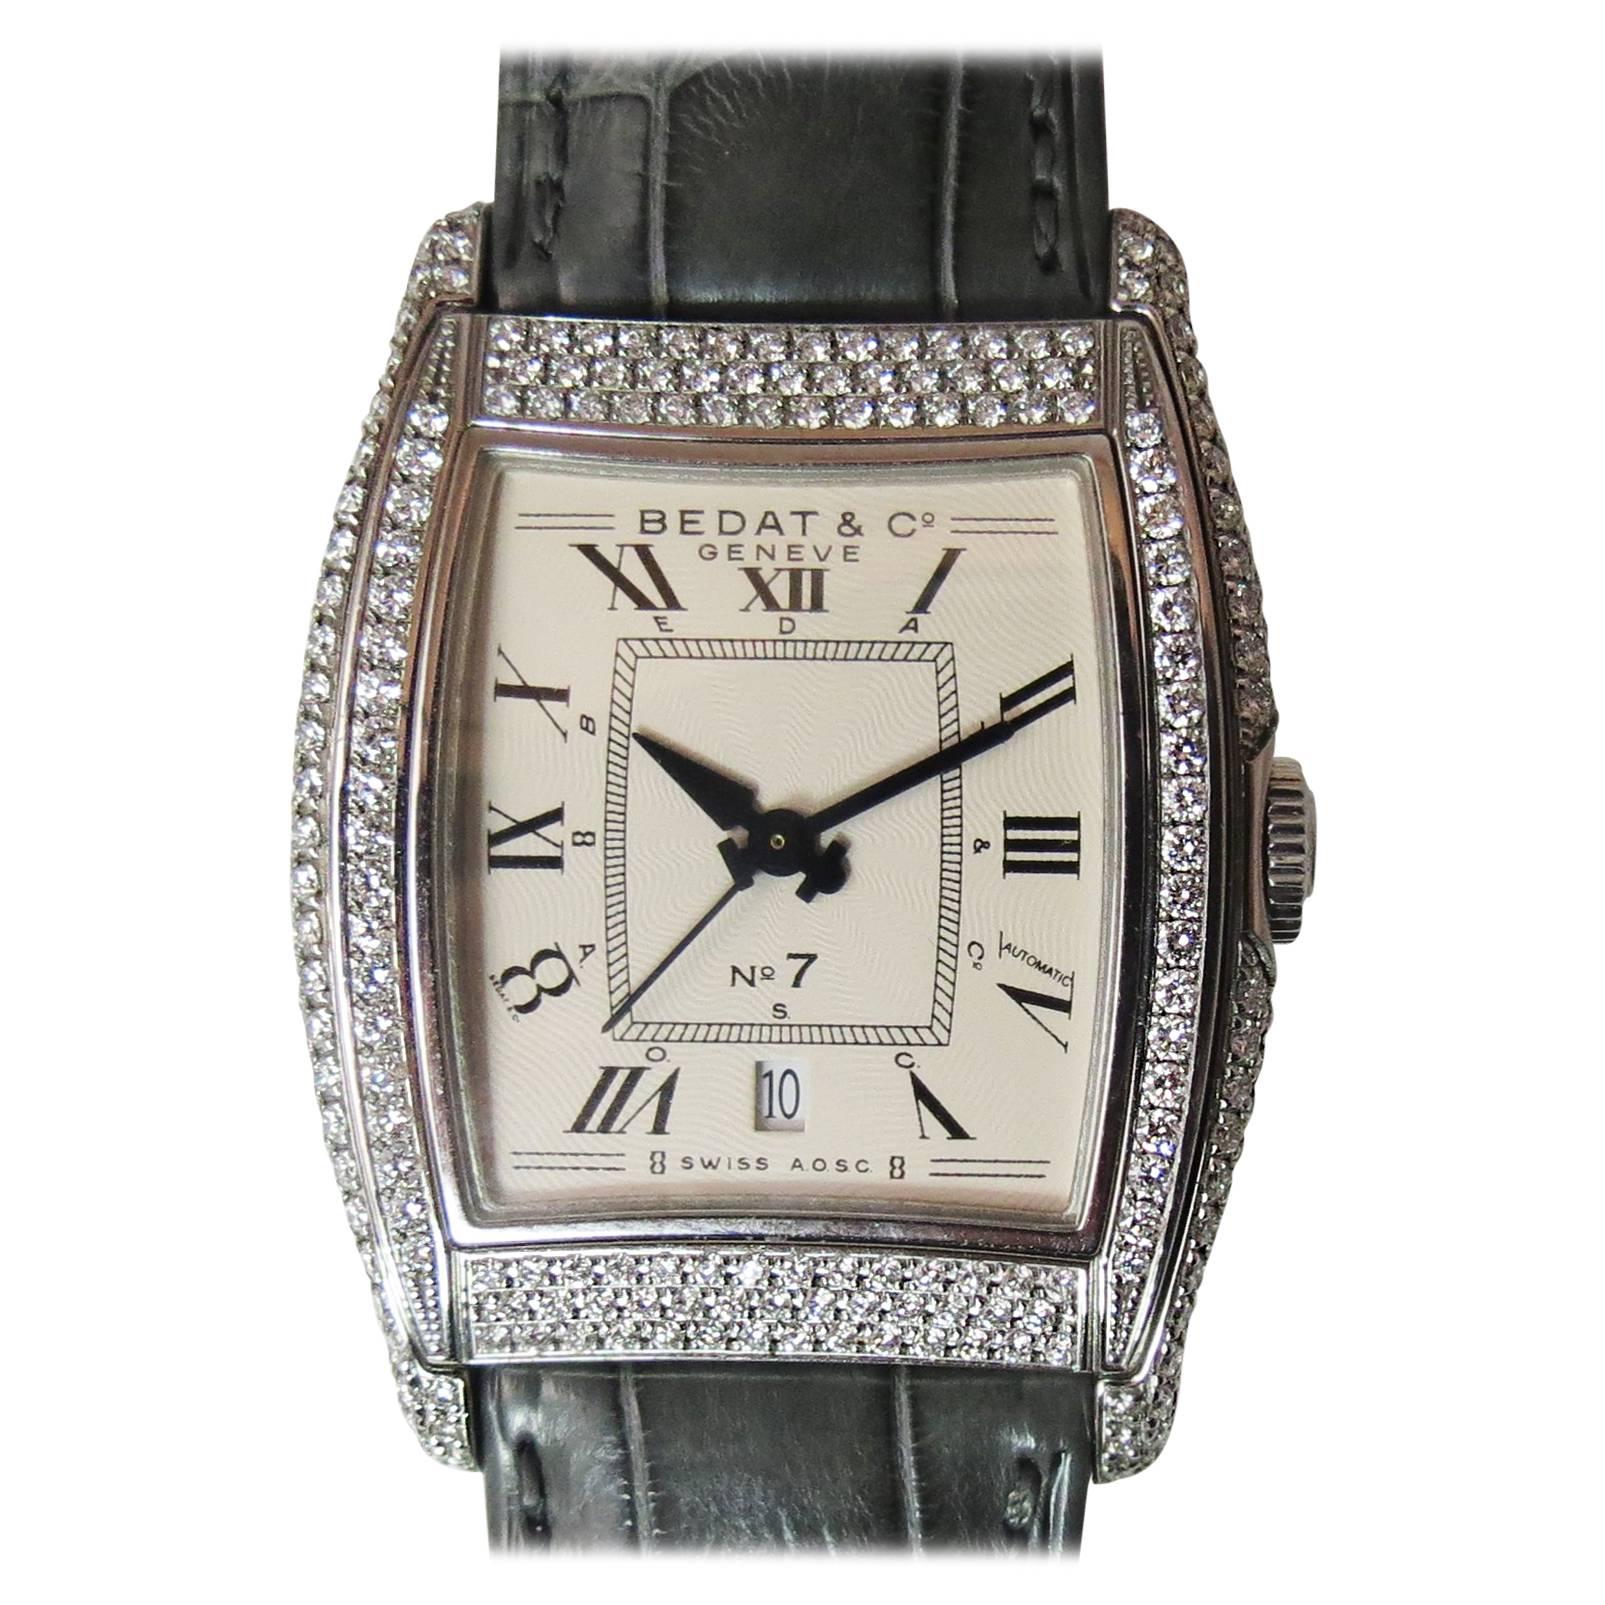 Brand new in box, Ladies Bedat No. 7 automatic steel and diamond watch with gray alligator strap and deployant buckle, Roman numerals, date window, sweep second hand, guilloche dial, diamond bezel and case, with 284 full cut round diamonds weighing